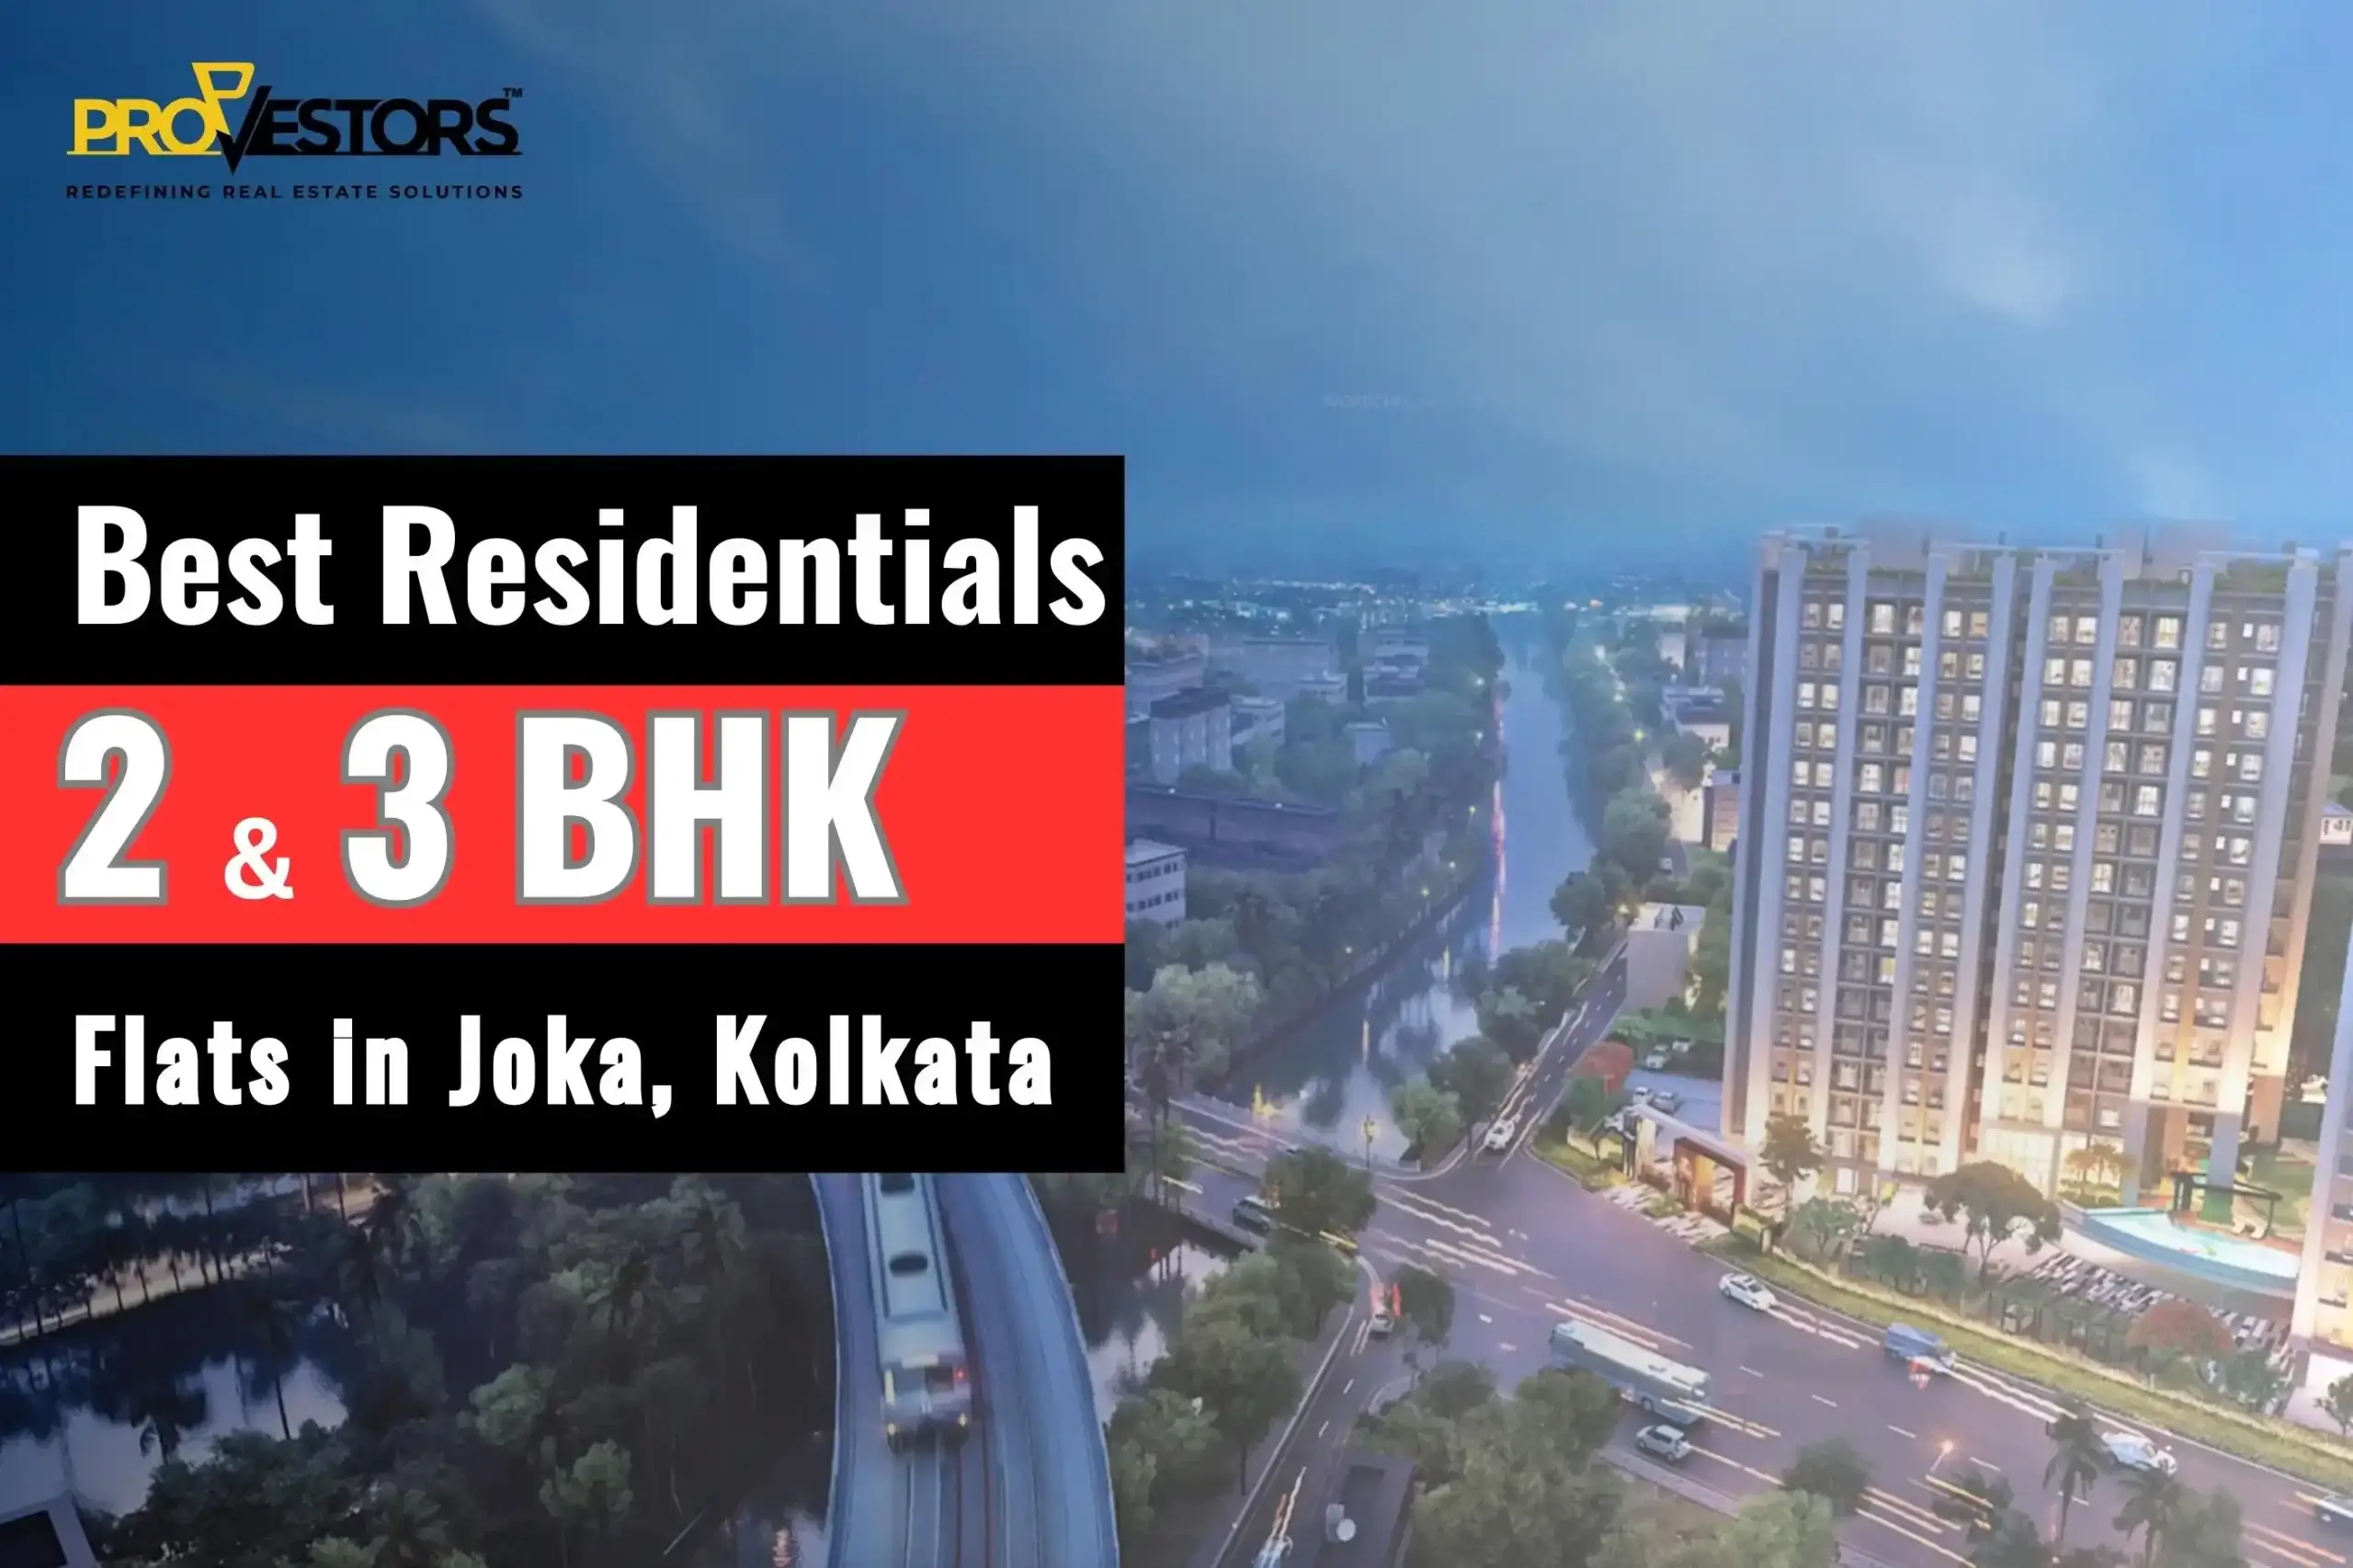 Which is the best residential project to offer 2&3 BHK flats with modern amenities in Joka, Kolkata?